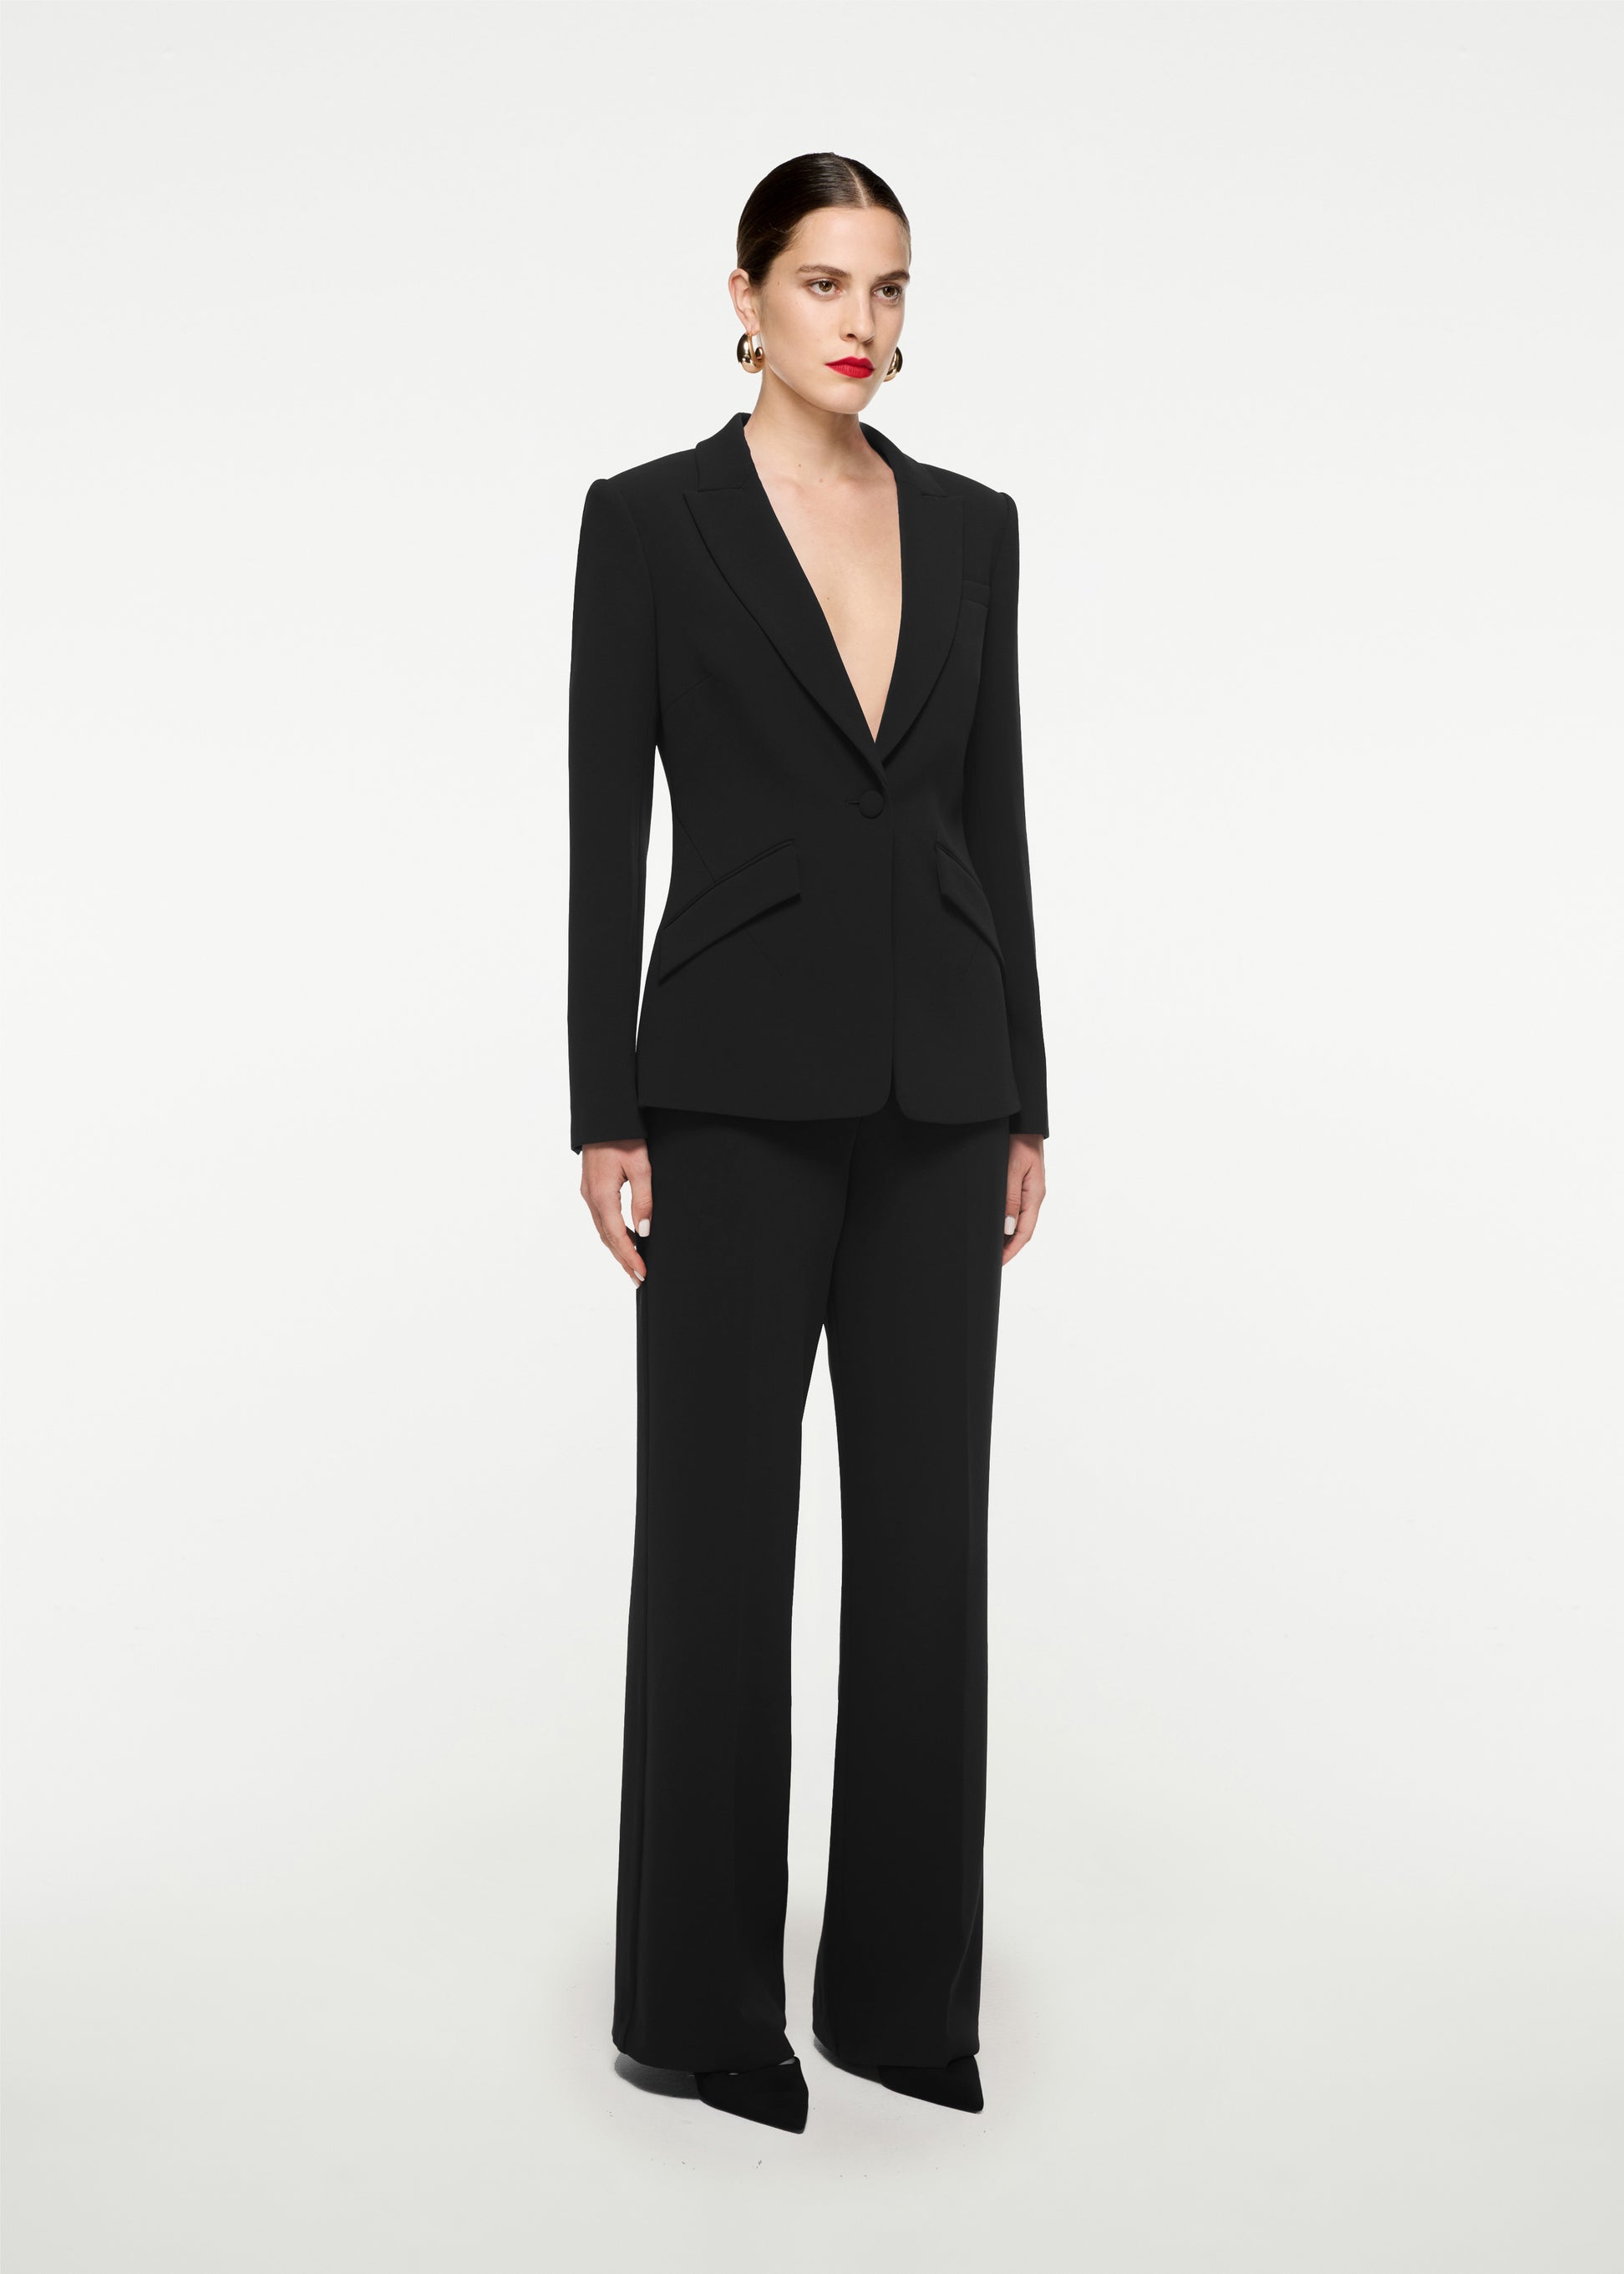 Woman wearing the Single Breasted Stretch Cady Blazer in Black